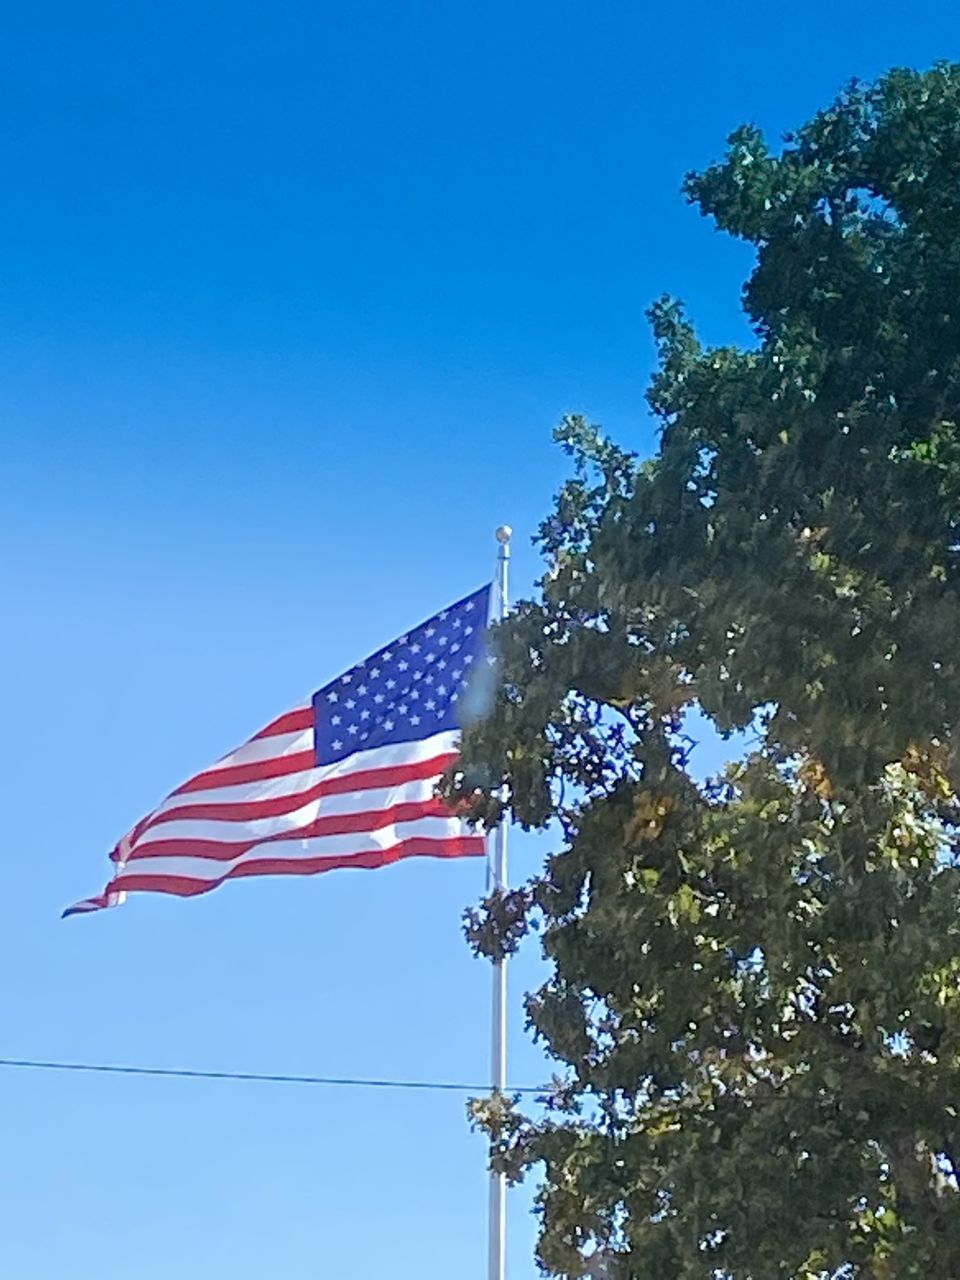 flag, patriotism, sky, blue, tree, nature, low angle view, plant, striped, no people, clear sky, day, outdoors, star shape, independence, environment, symbolism, wind, emotion, hanging